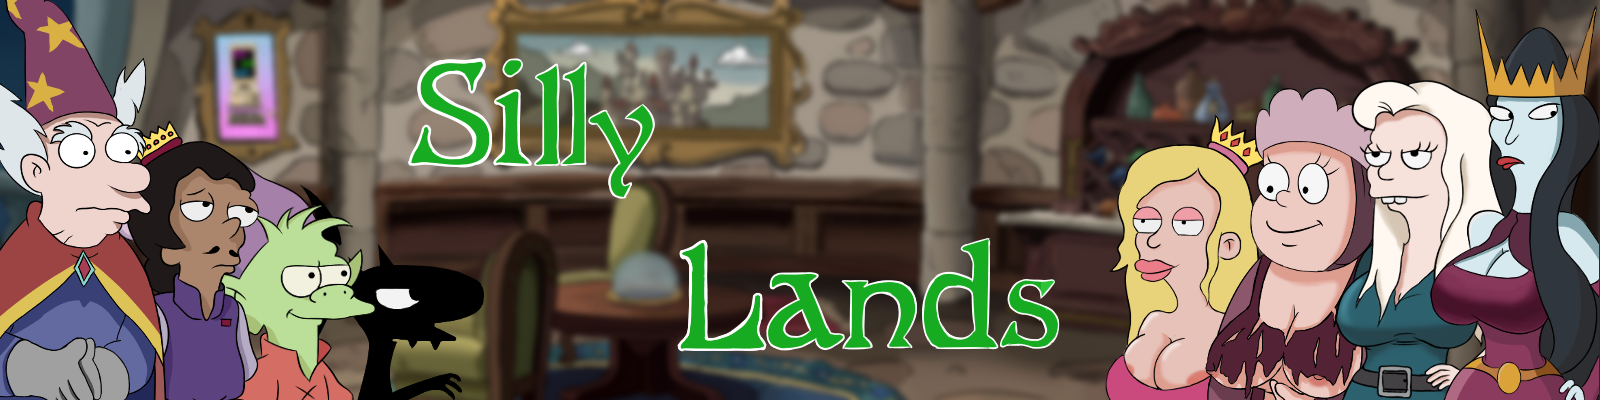 Silly Lands Apk Adult Game Android Download (1)